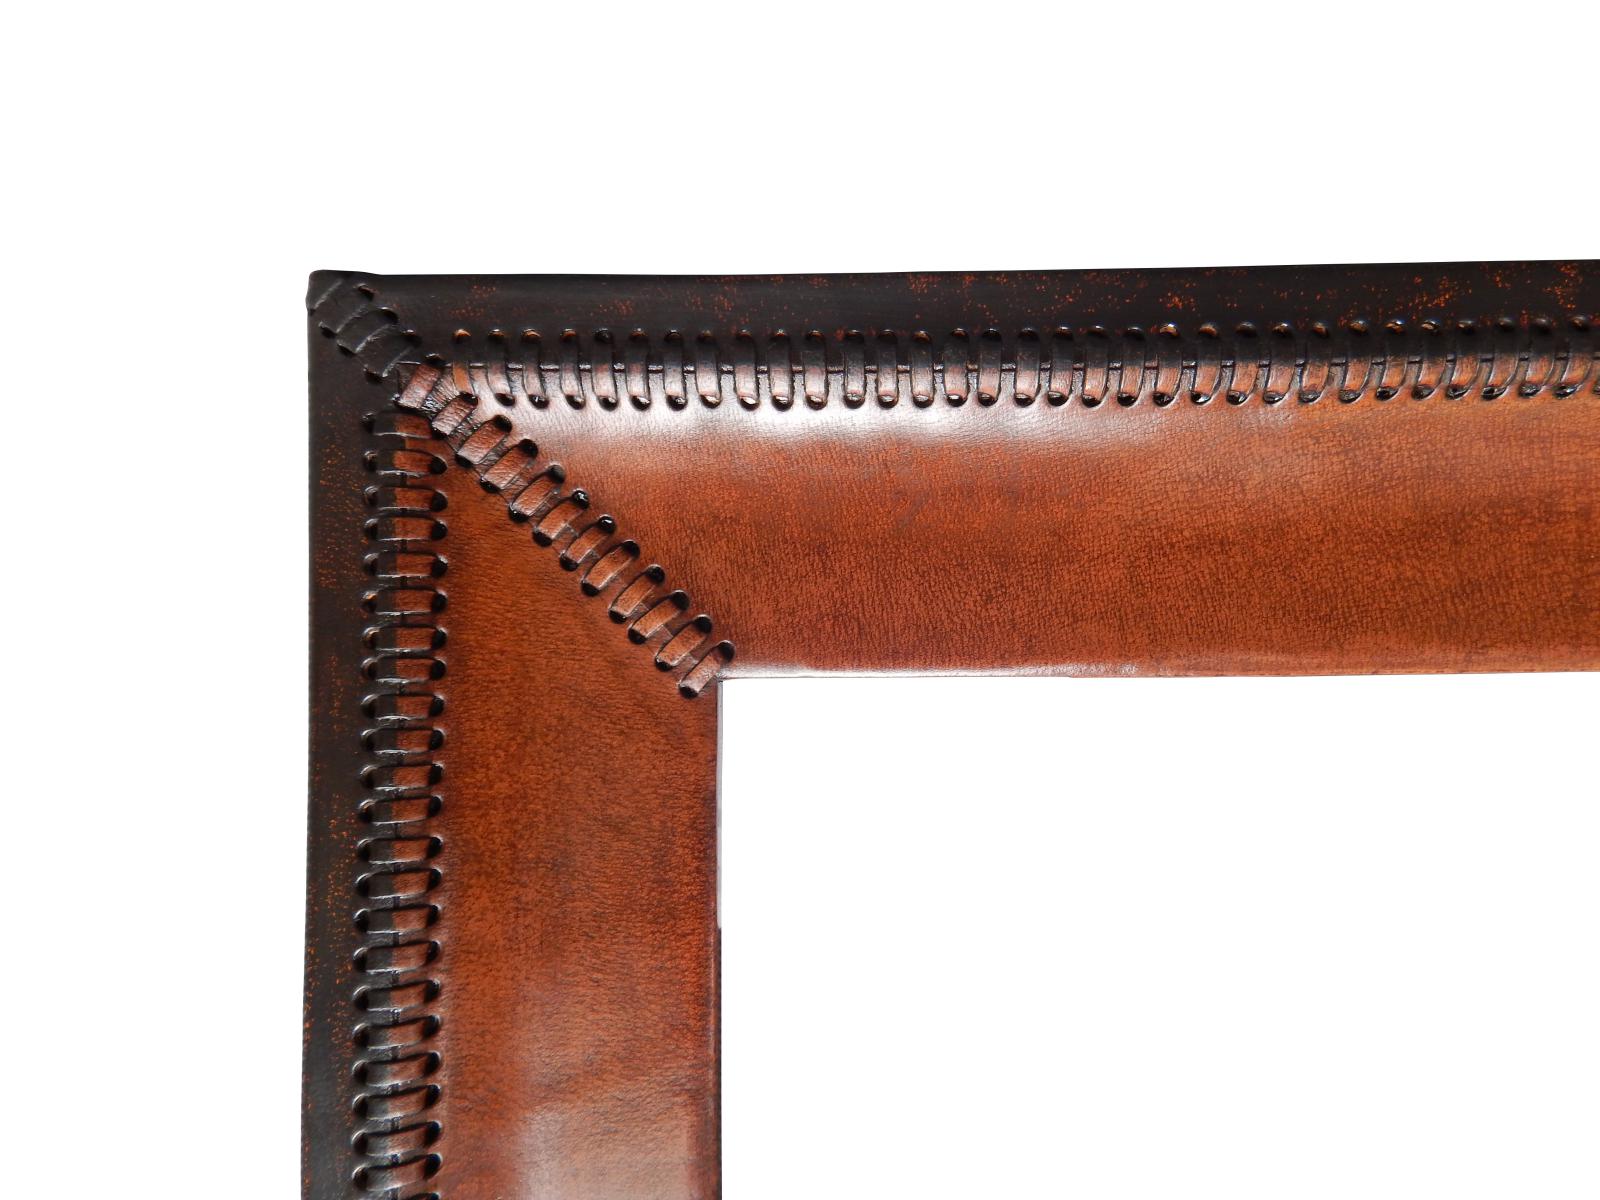 Handmade custom frame covered in natural leather and hand stitches